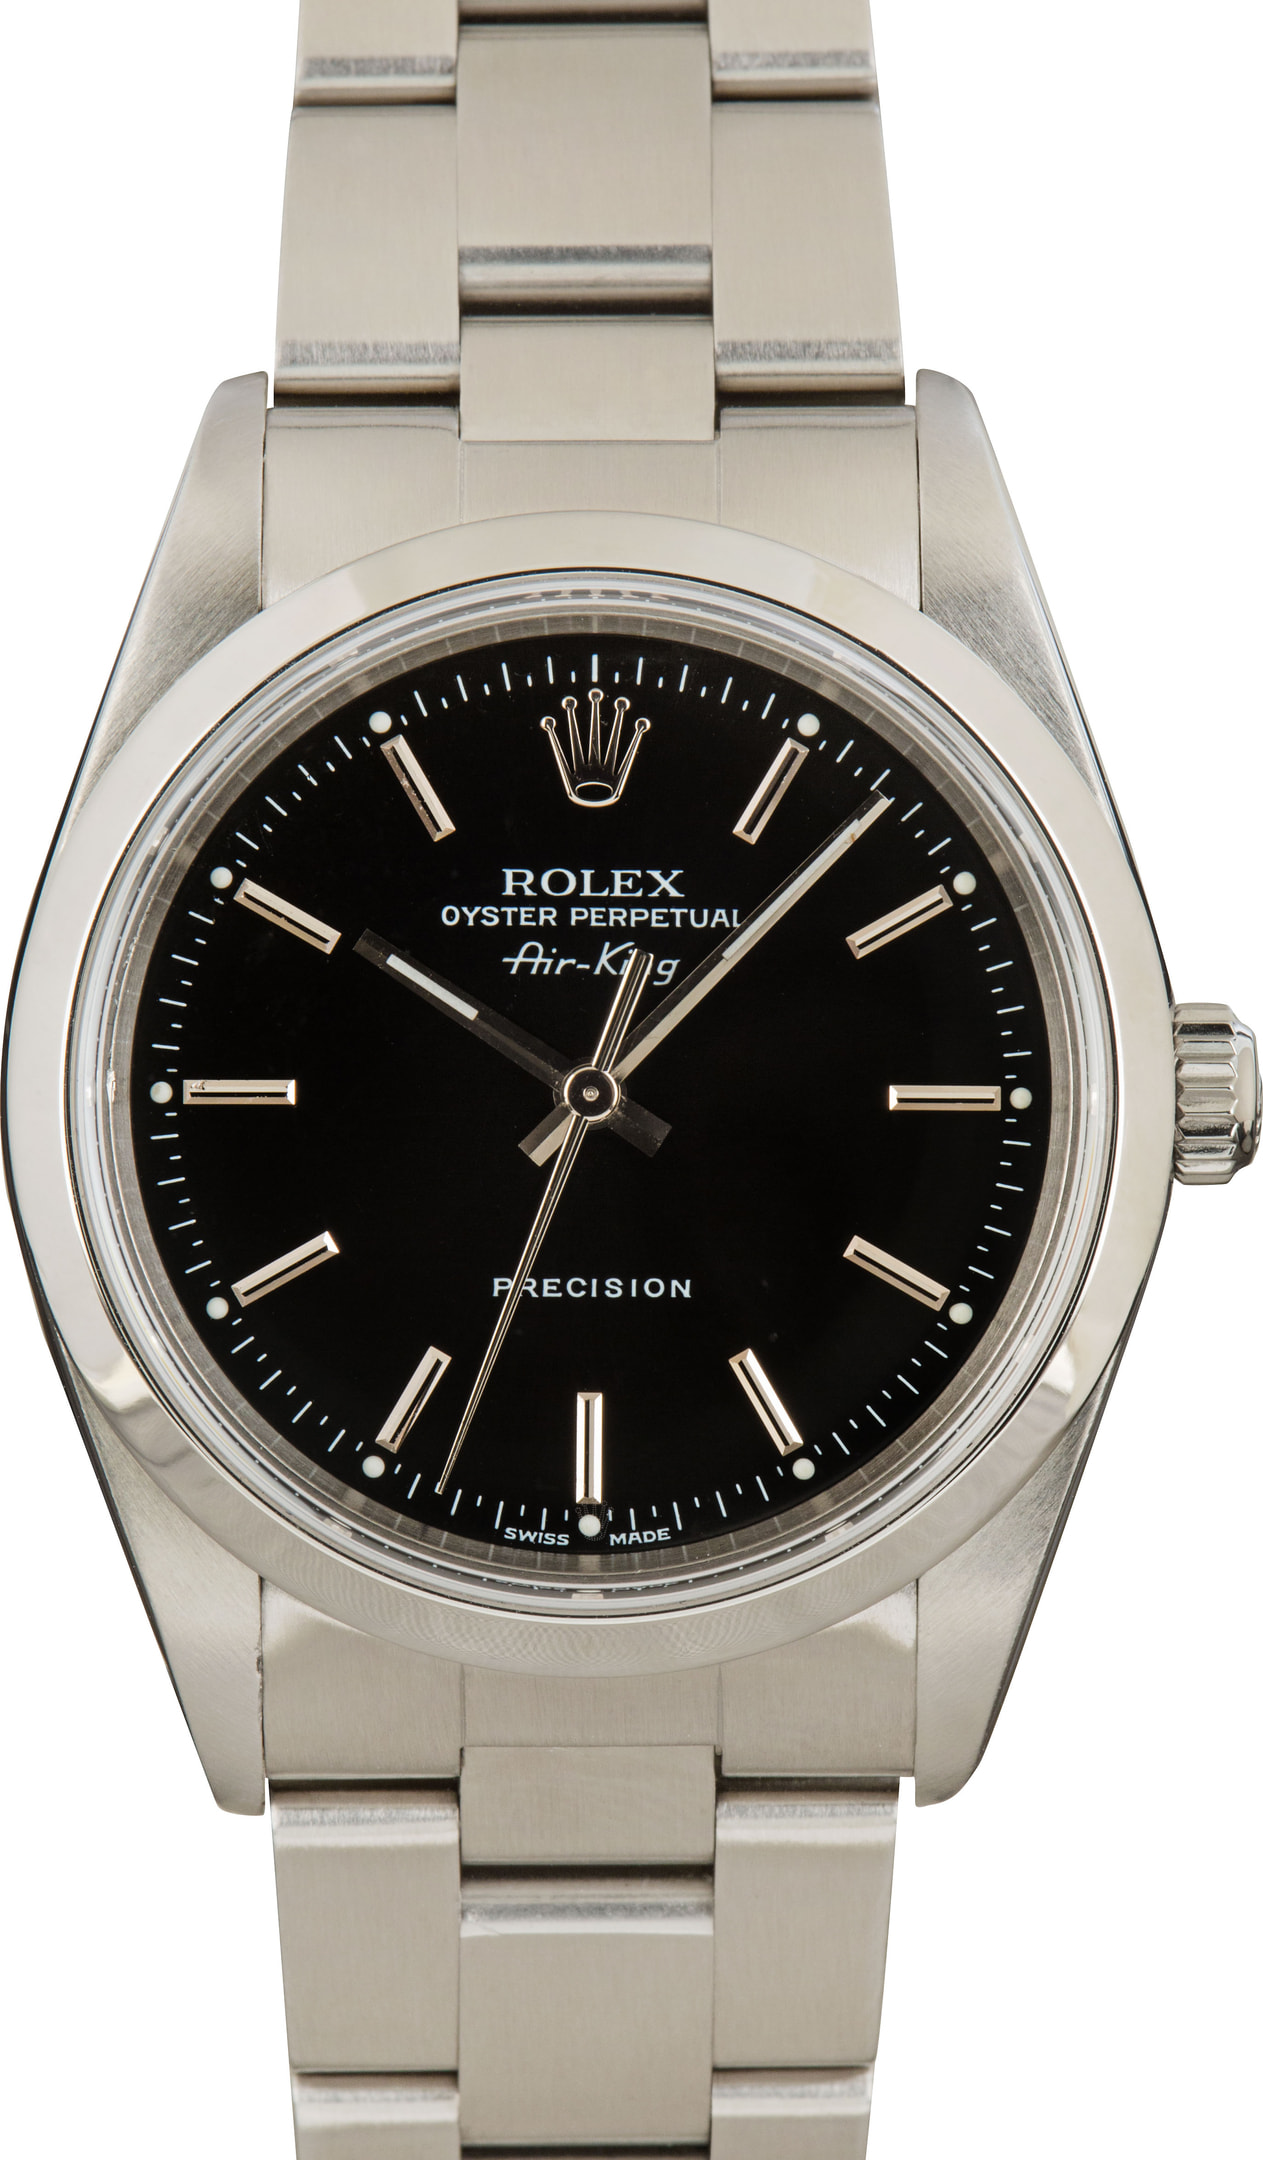 Buy Used Rolex Air-King 14000 | Bob's Watches - Sku: 164359